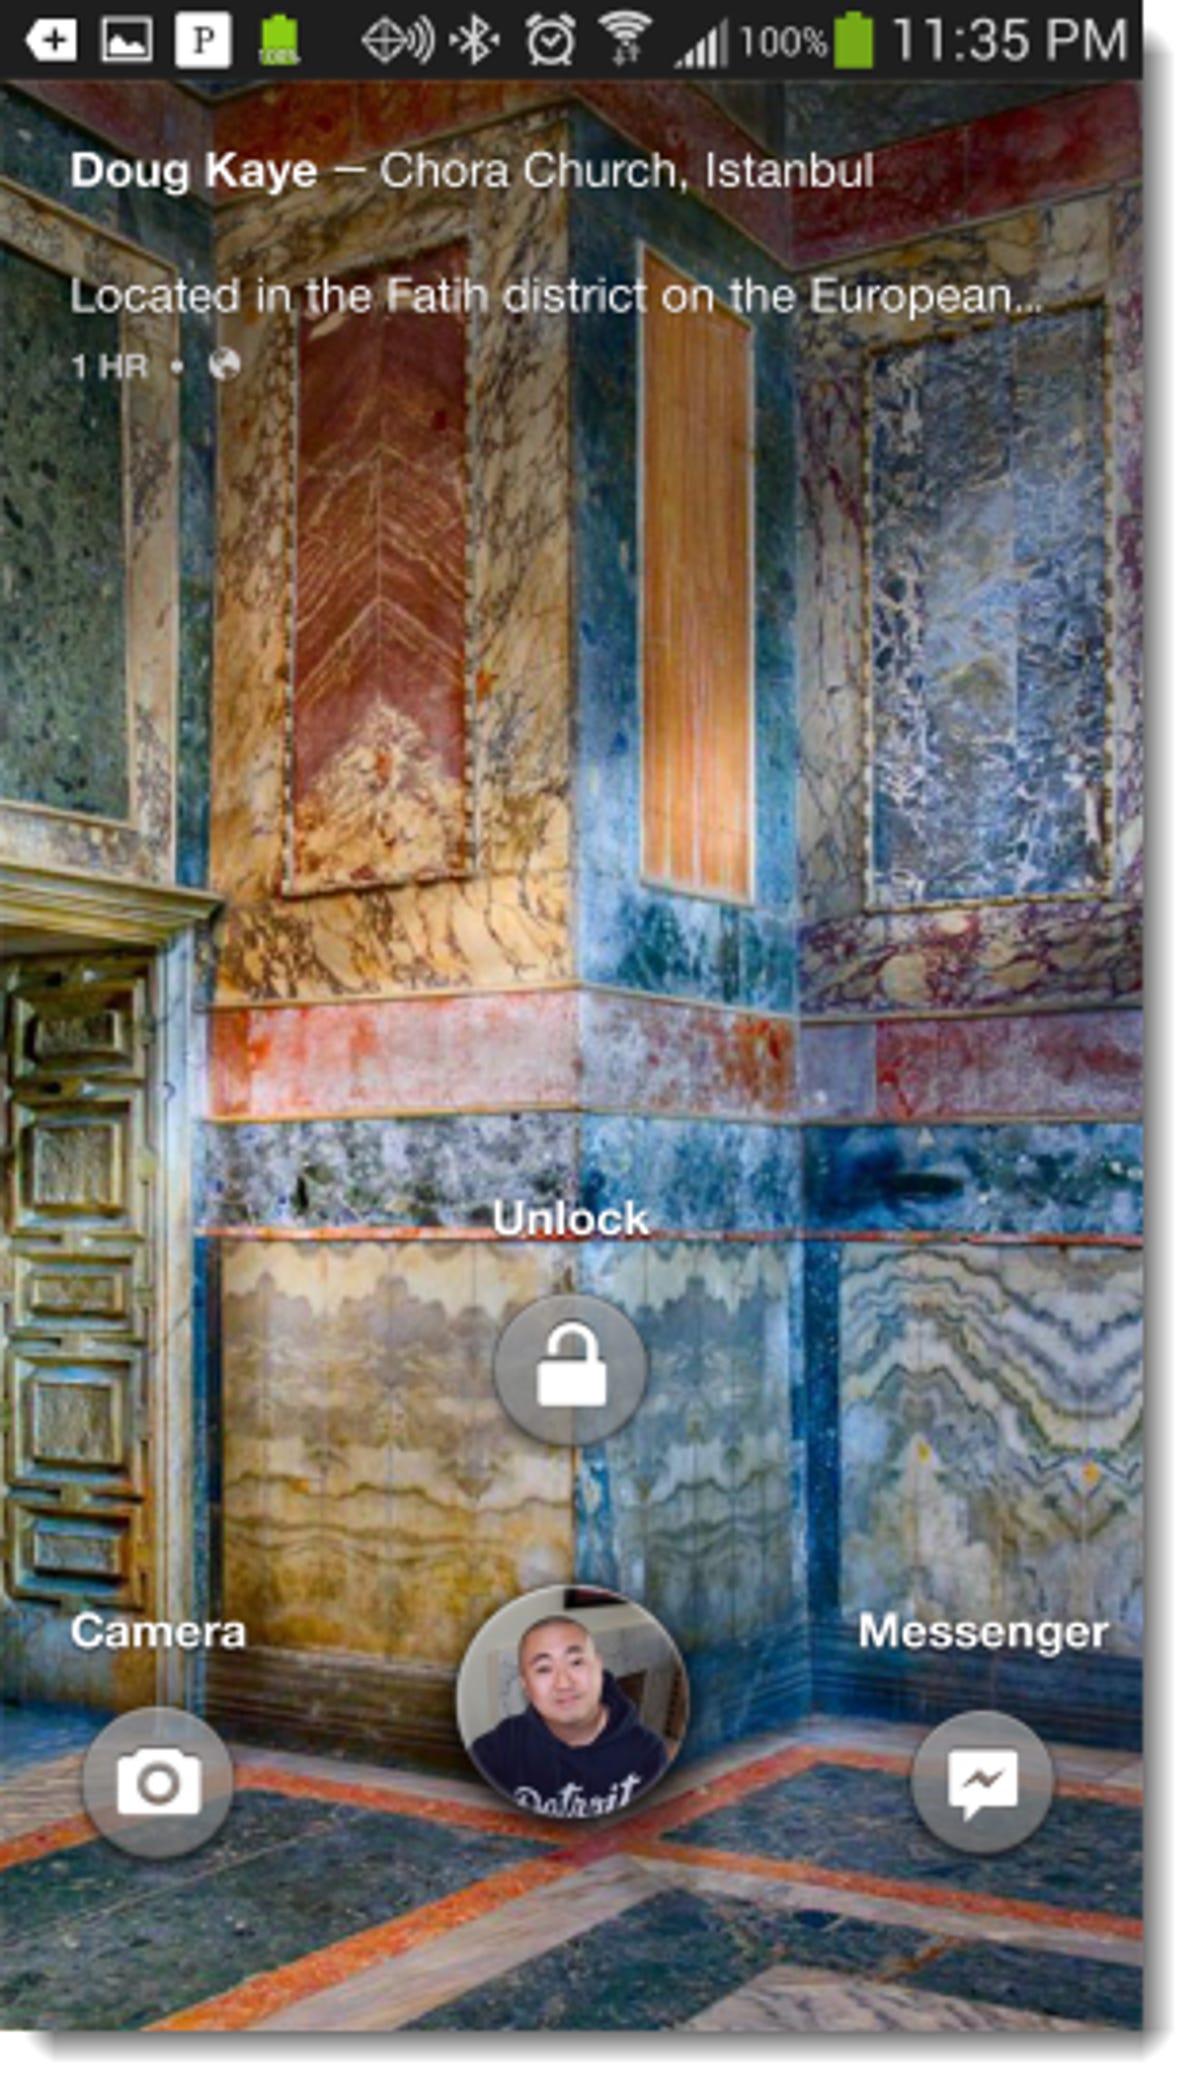 Facebook for Android Cover Feed lock screen